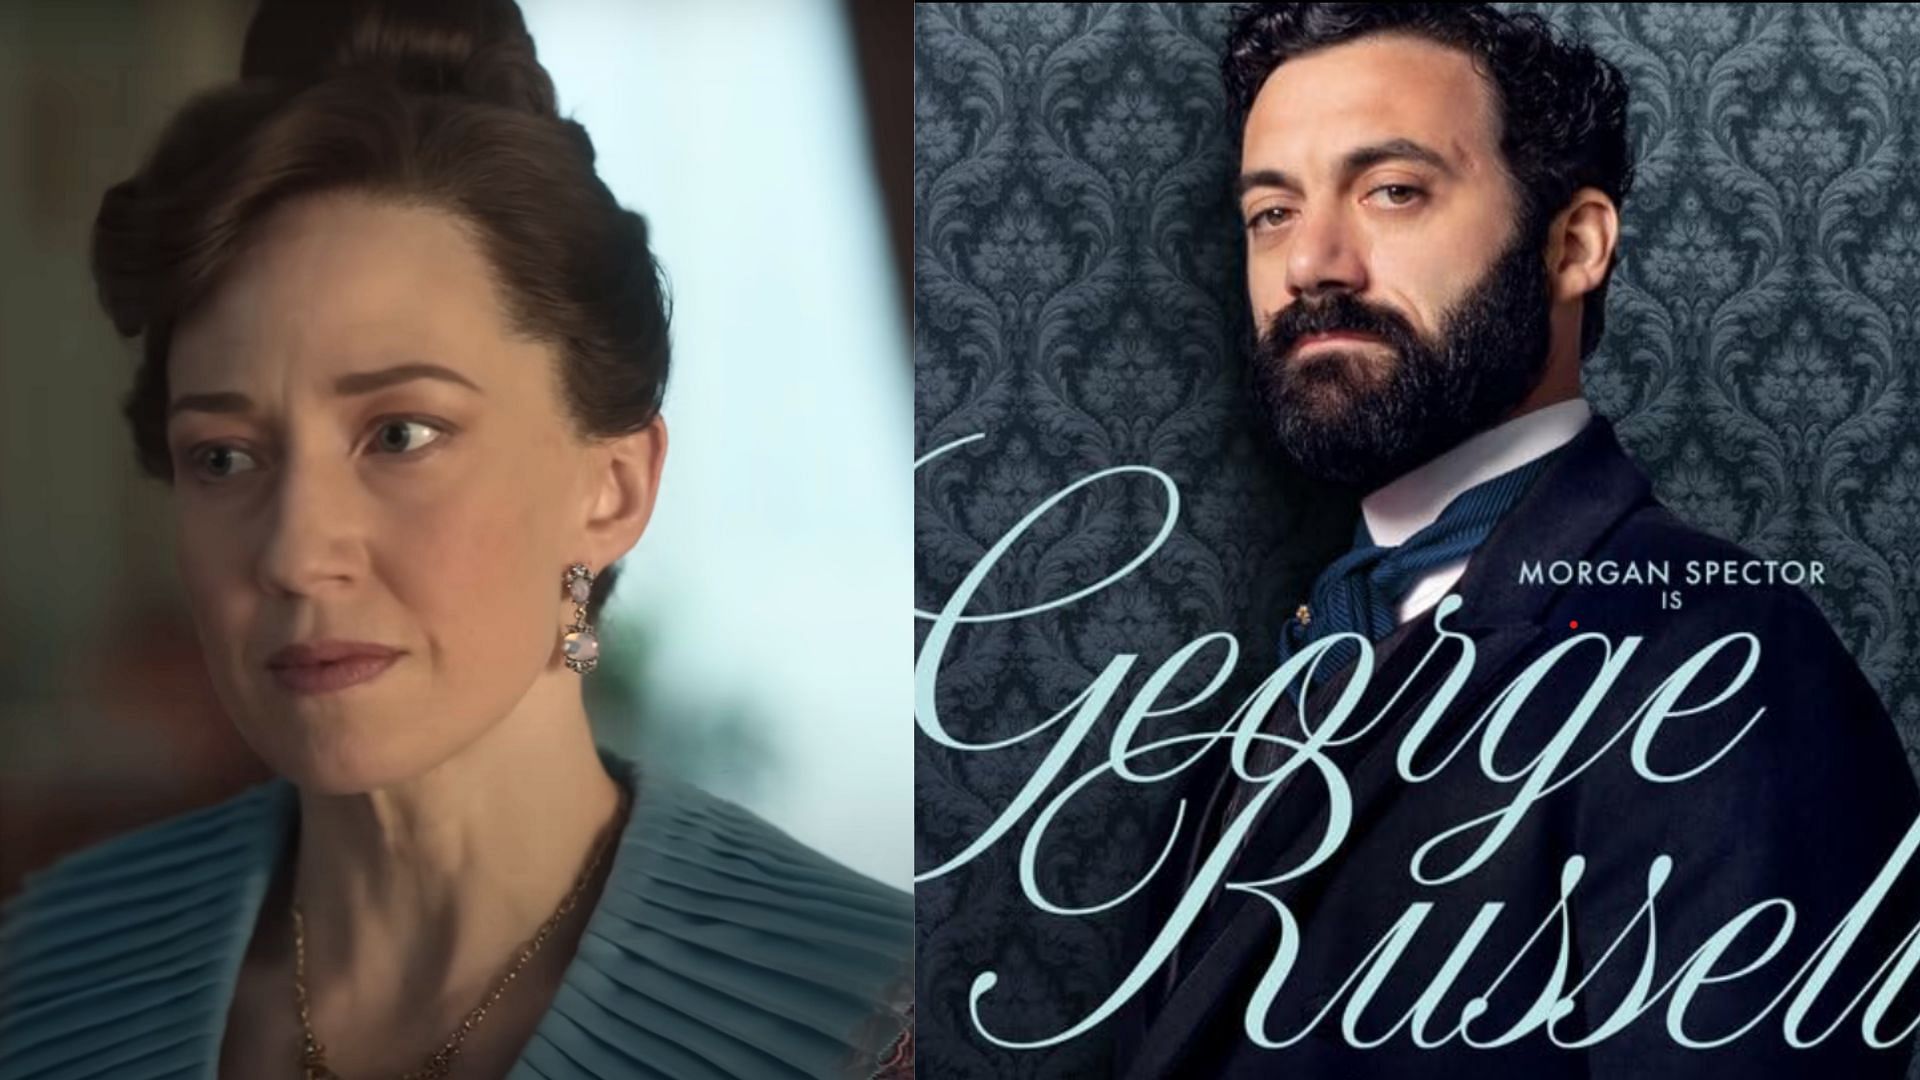 George Russell is inspired by the robber barons of America (Image via HBO and IMDb)